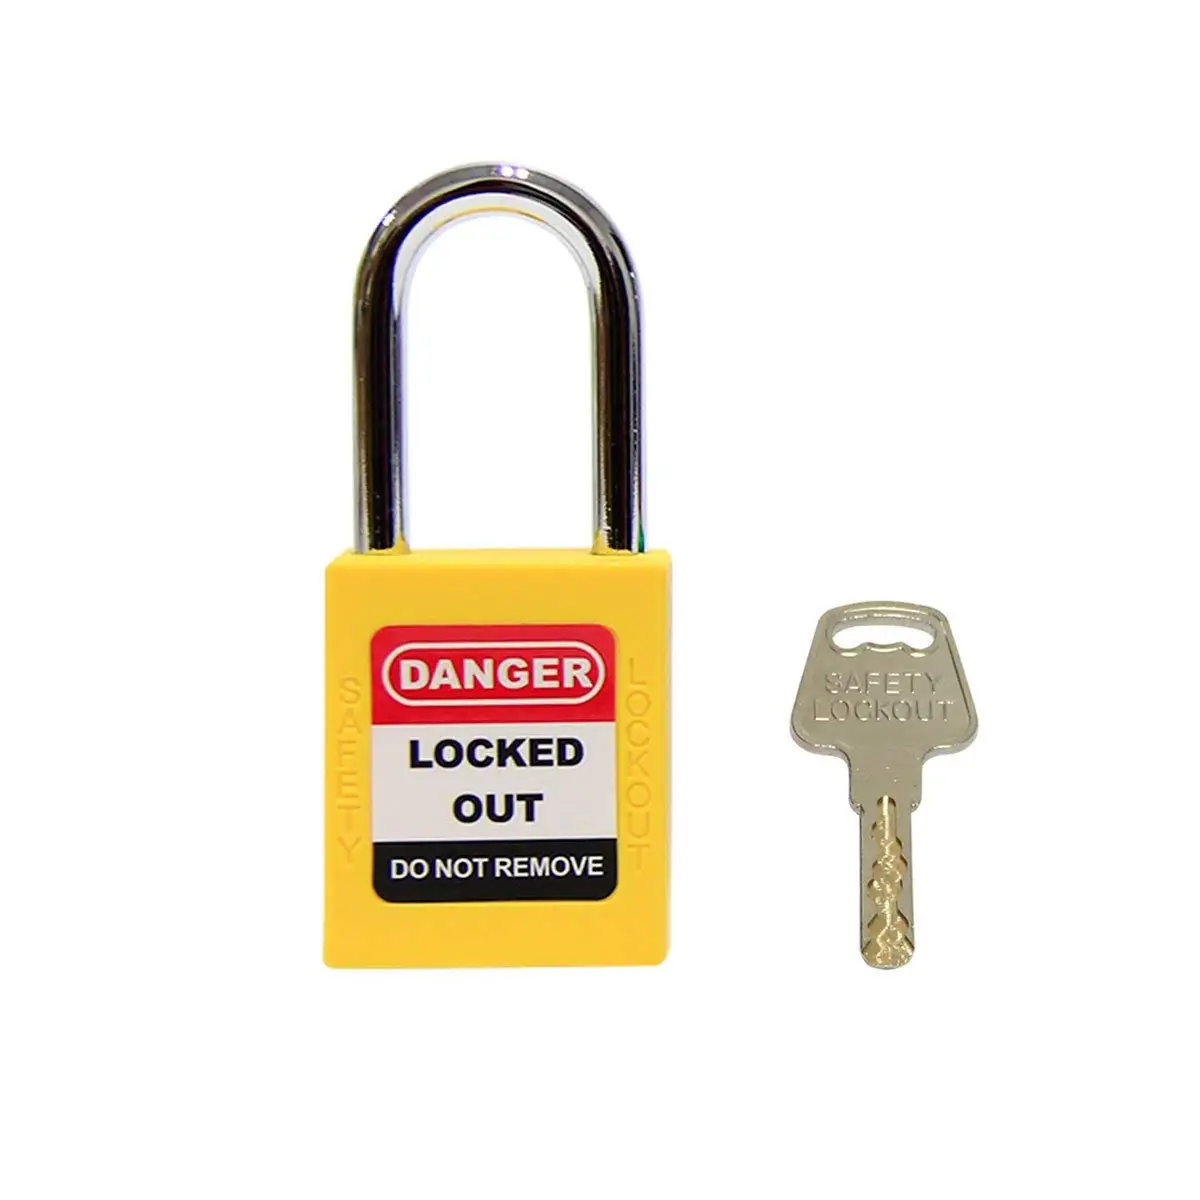 High Security PVC Safety Strong Lockout Padlock with Writable Label 